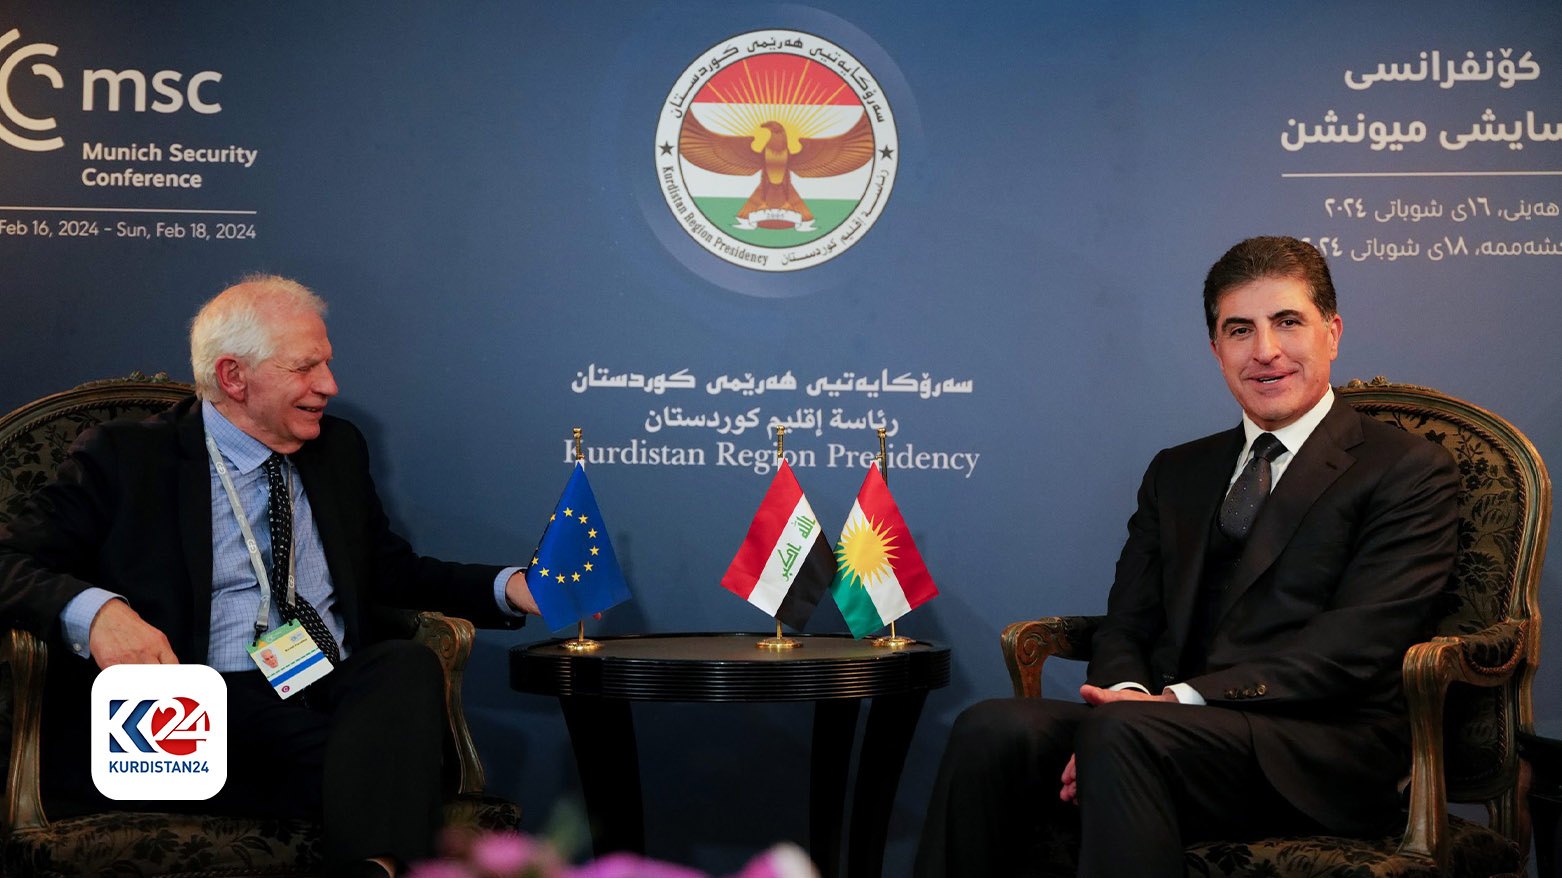 The President of Kurdistan Region Nechirvan Barzani (right) during his meeting with the High Representative of the European Union for Foreign Affairs and Security Policy,Josep Borrell, Feb. 18, 2024. (Photo: Kurdistan Region Presidency)